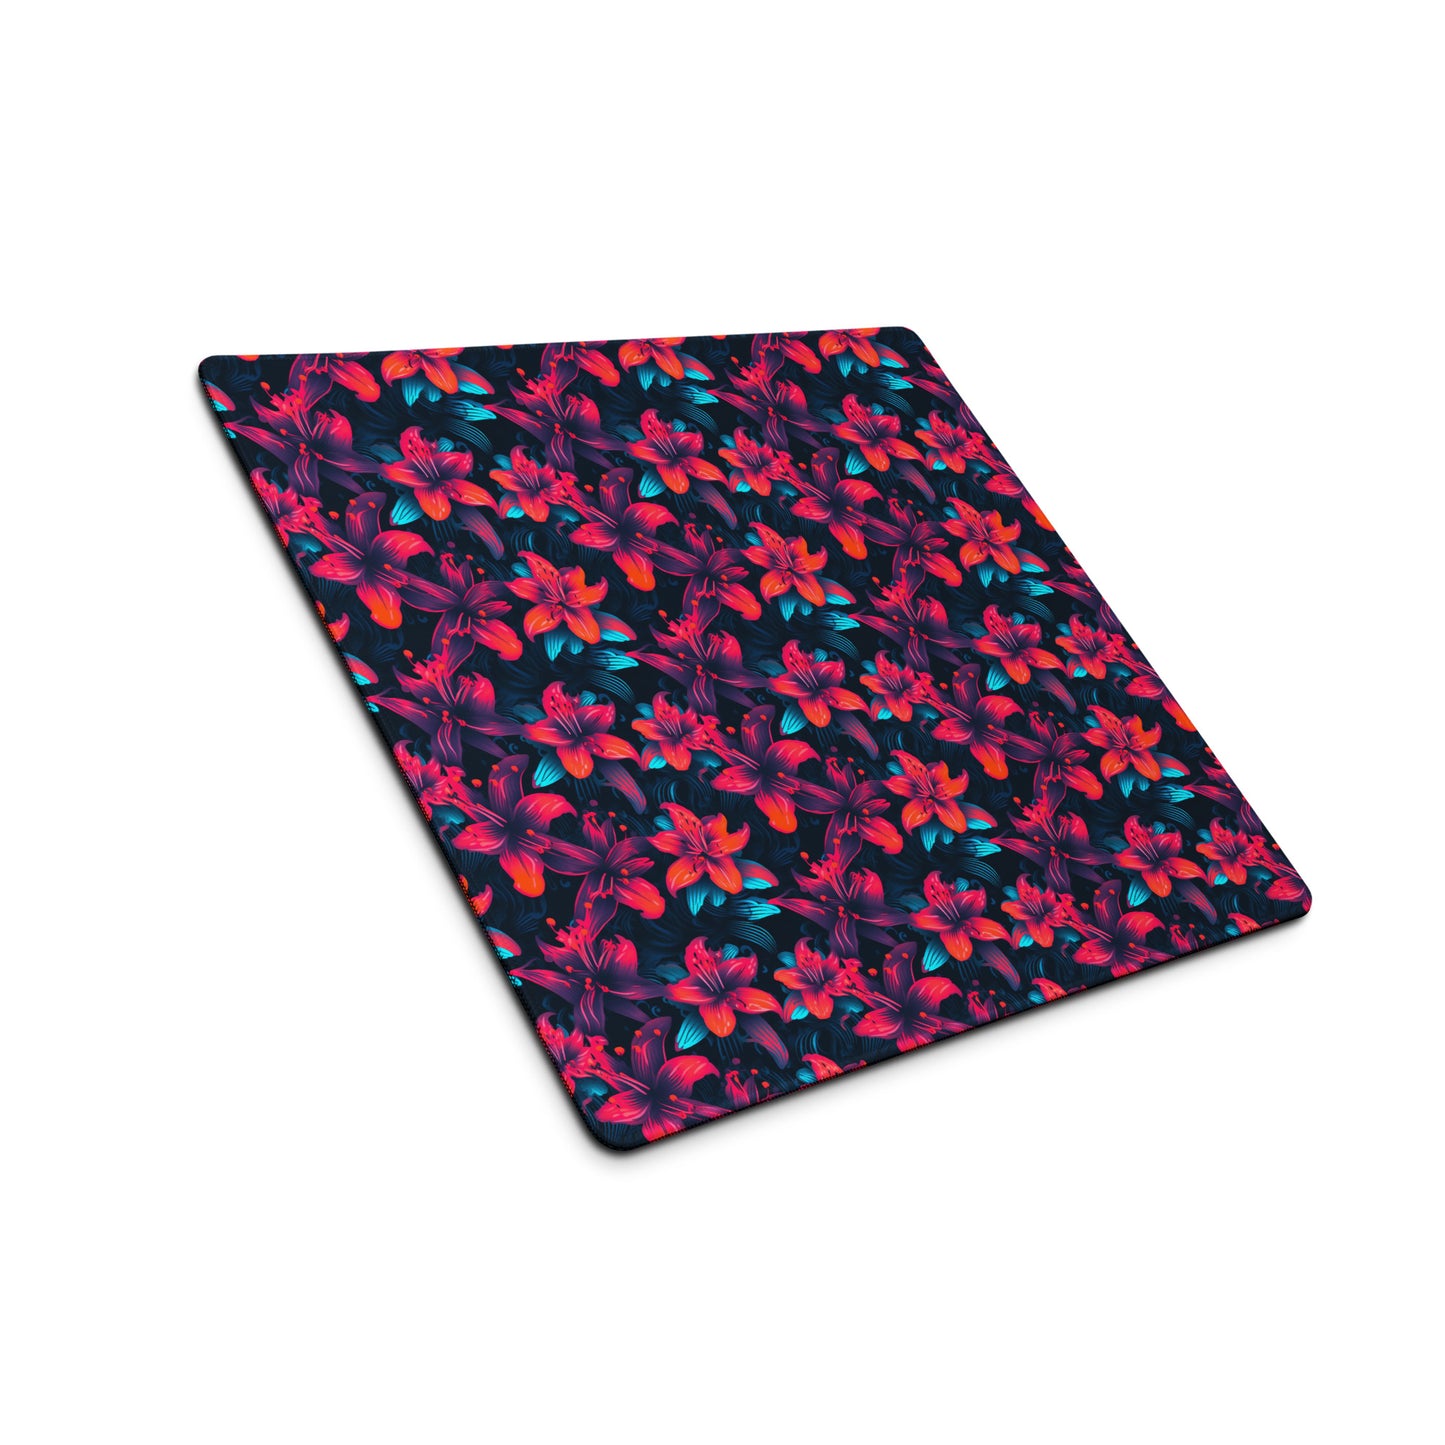 A 18" x 16" desk pad with a neon red and blue floral pattern sitting at an angle.